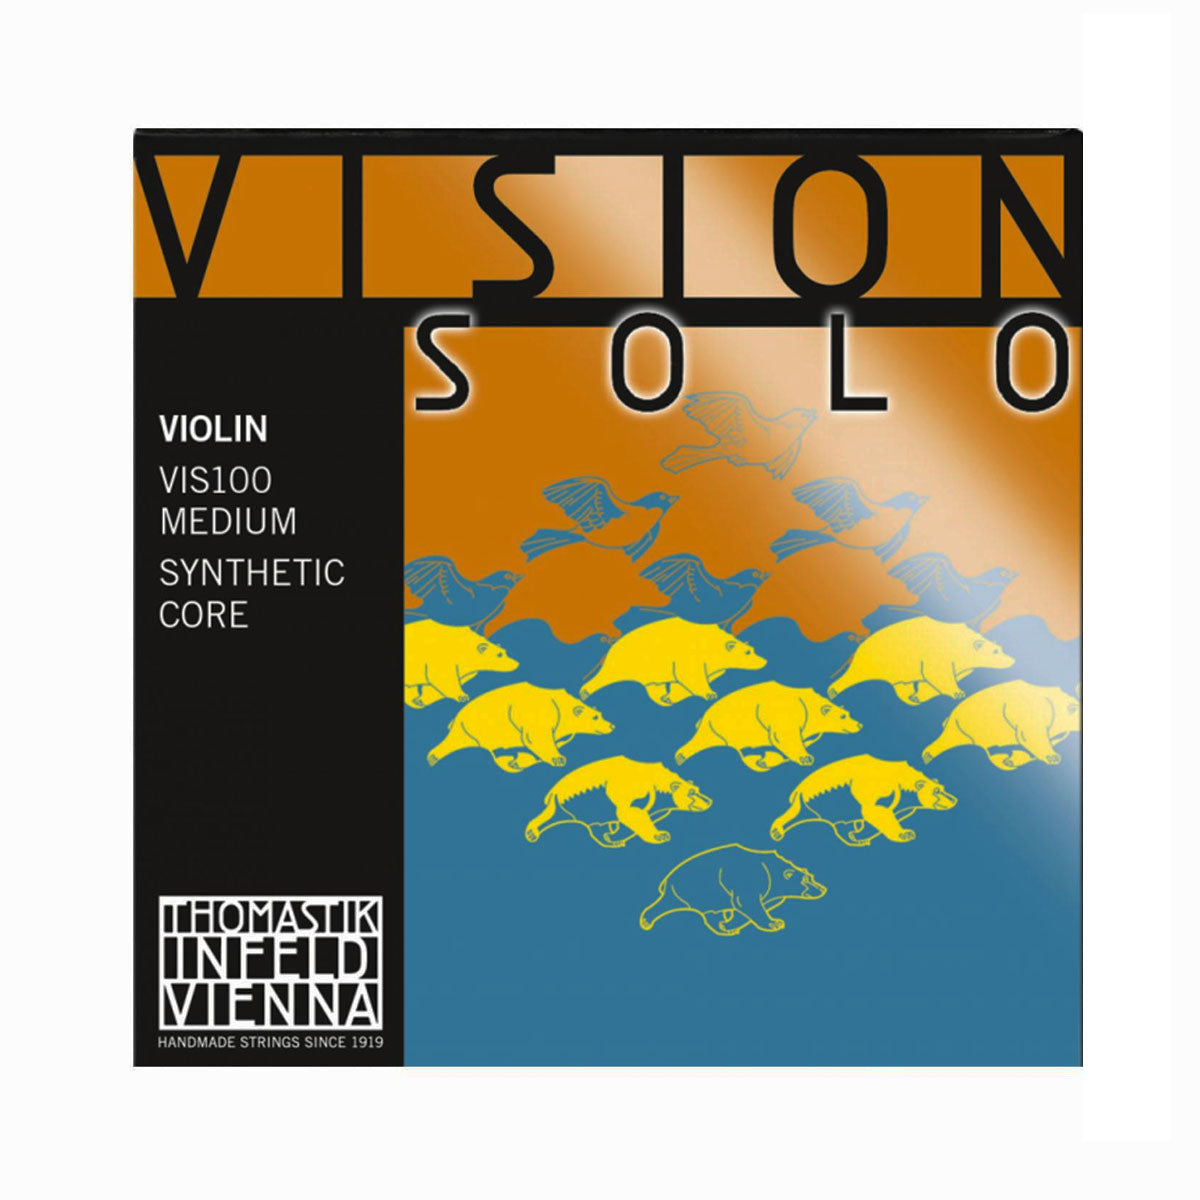 Vision Solo Violin Strings, Thomastik Infeld, Austria, full size, 4/4, 3/4, 1/2, 1/4, 1/8, 1/16, hand-picked and inspected by Violins and such, with TEO musical Instruments, London Ontario Canada